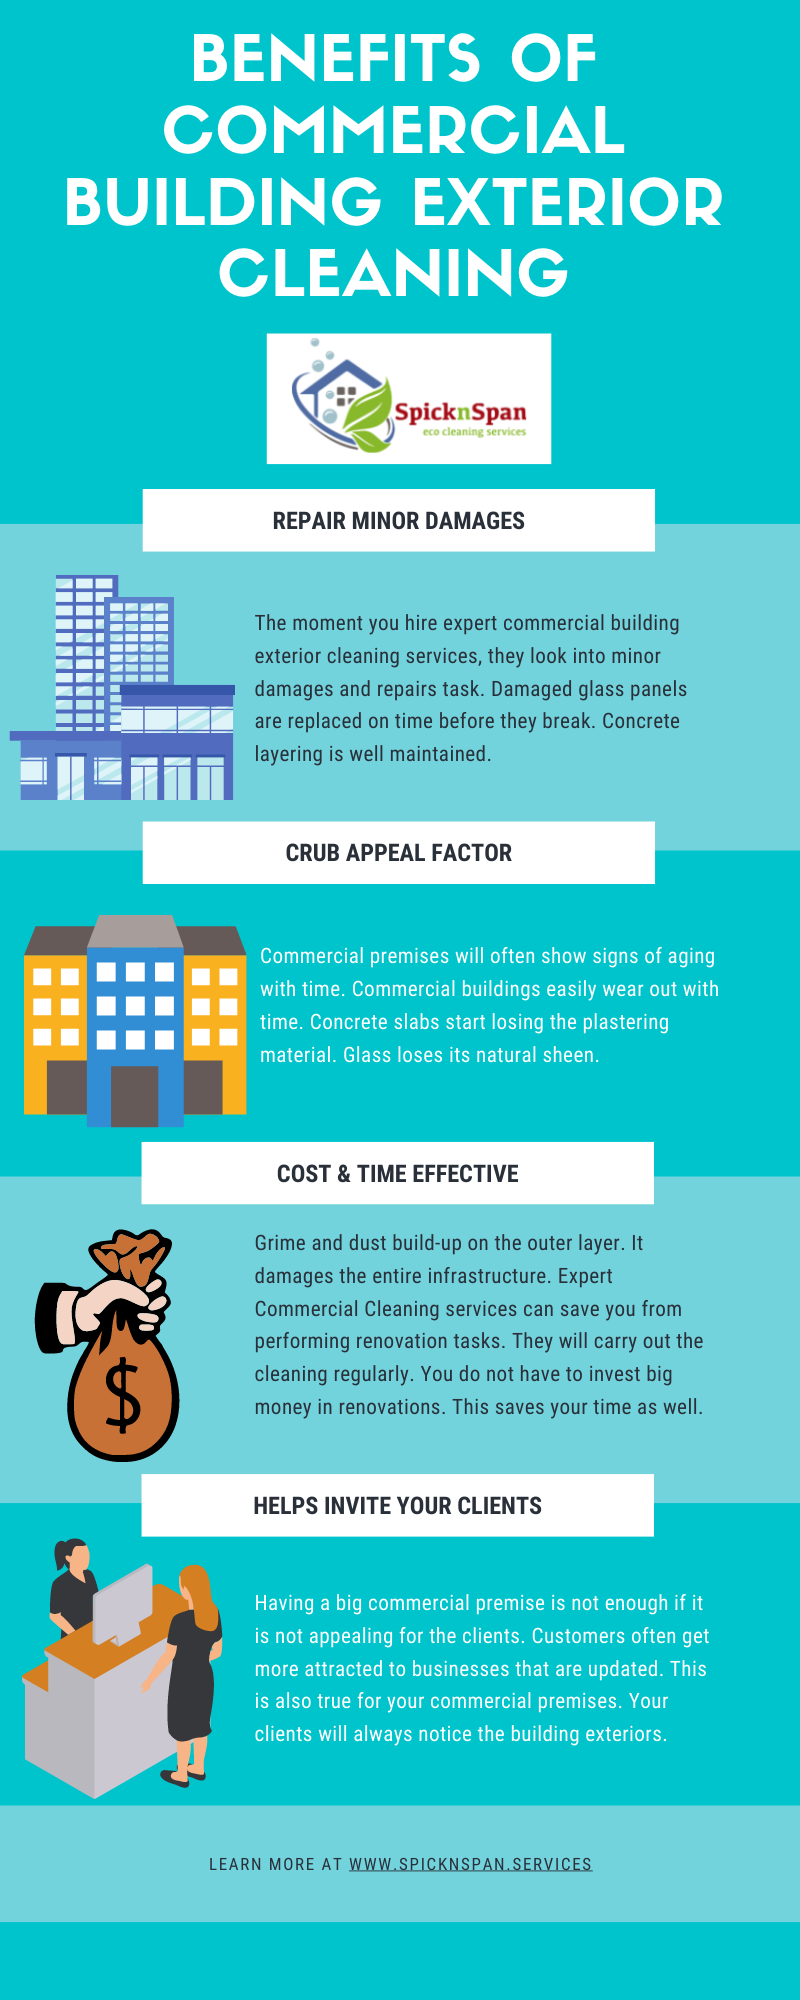 Benefits of Commercial Building Exterior Cleaning